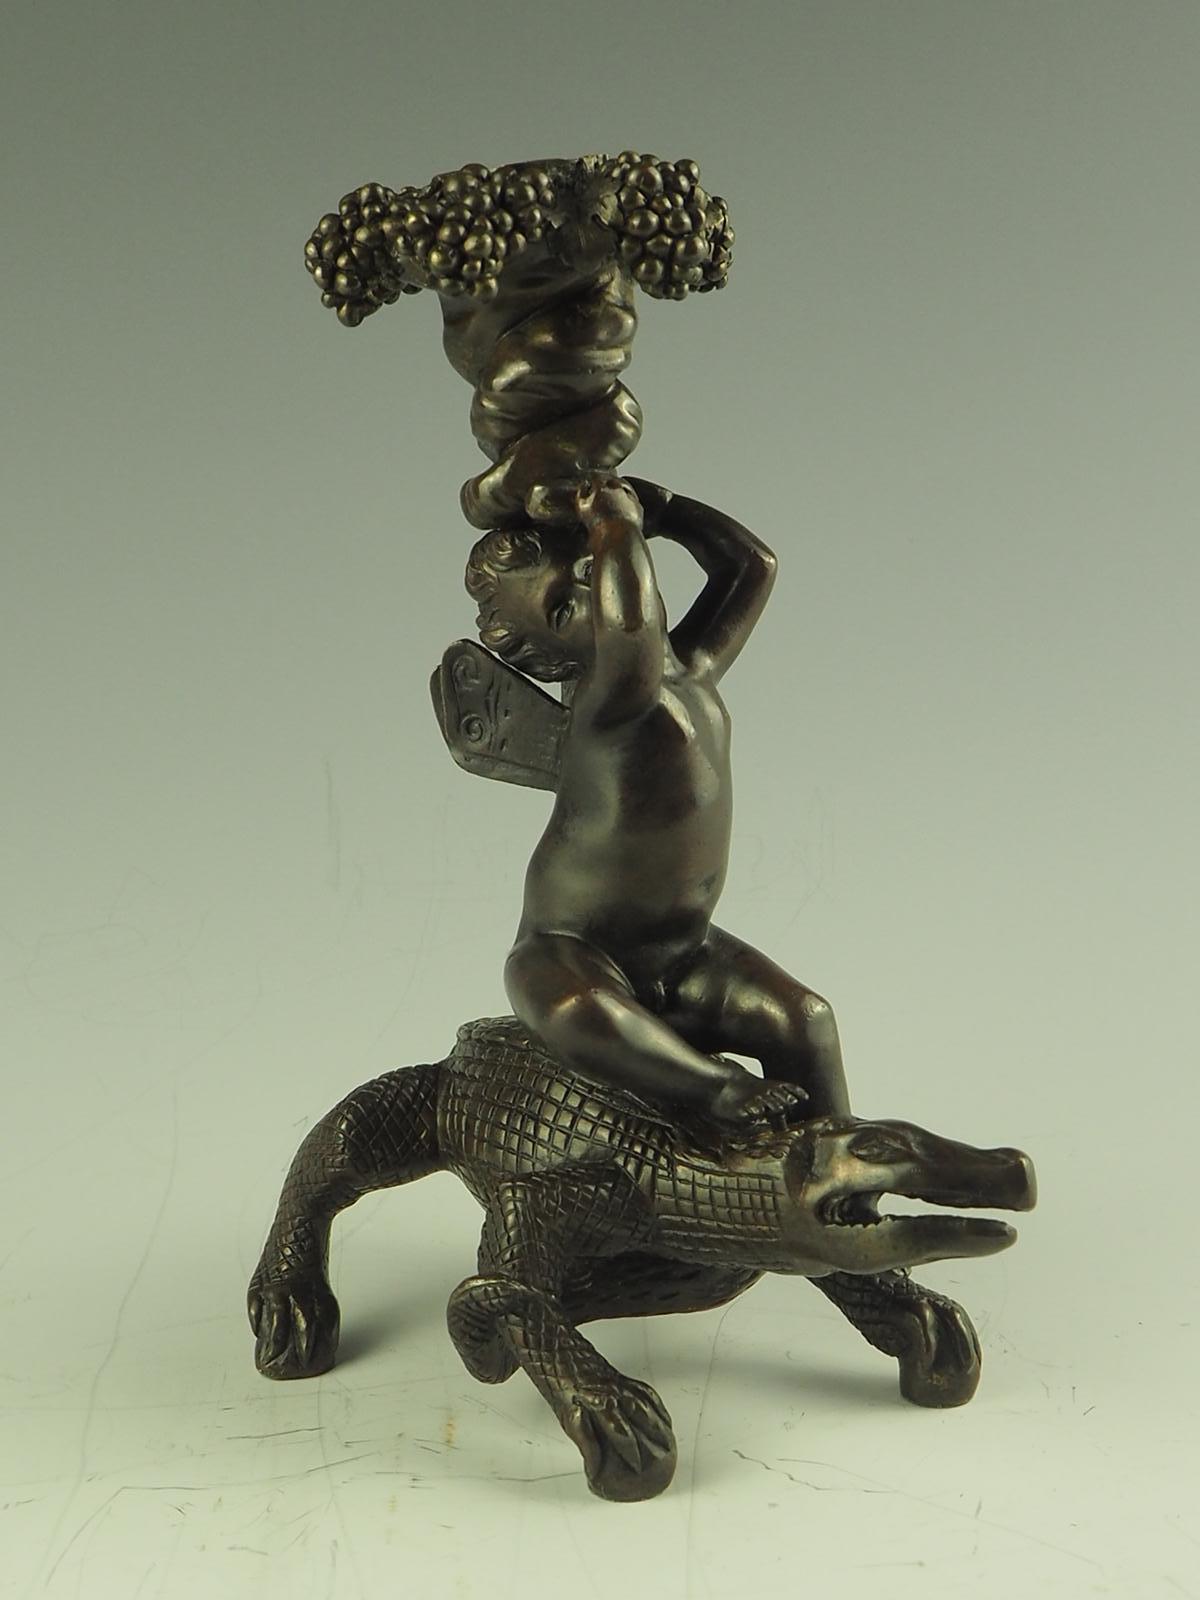 Antique bronze candlestick, depict a bacchanalian putto astride crocodile (or alligator), holding aloft entwined vines, rising to bunches of grapes and vine leaves. The putto is sat on a crocodile, with mouth open and tail twist beneath.

c 1890.